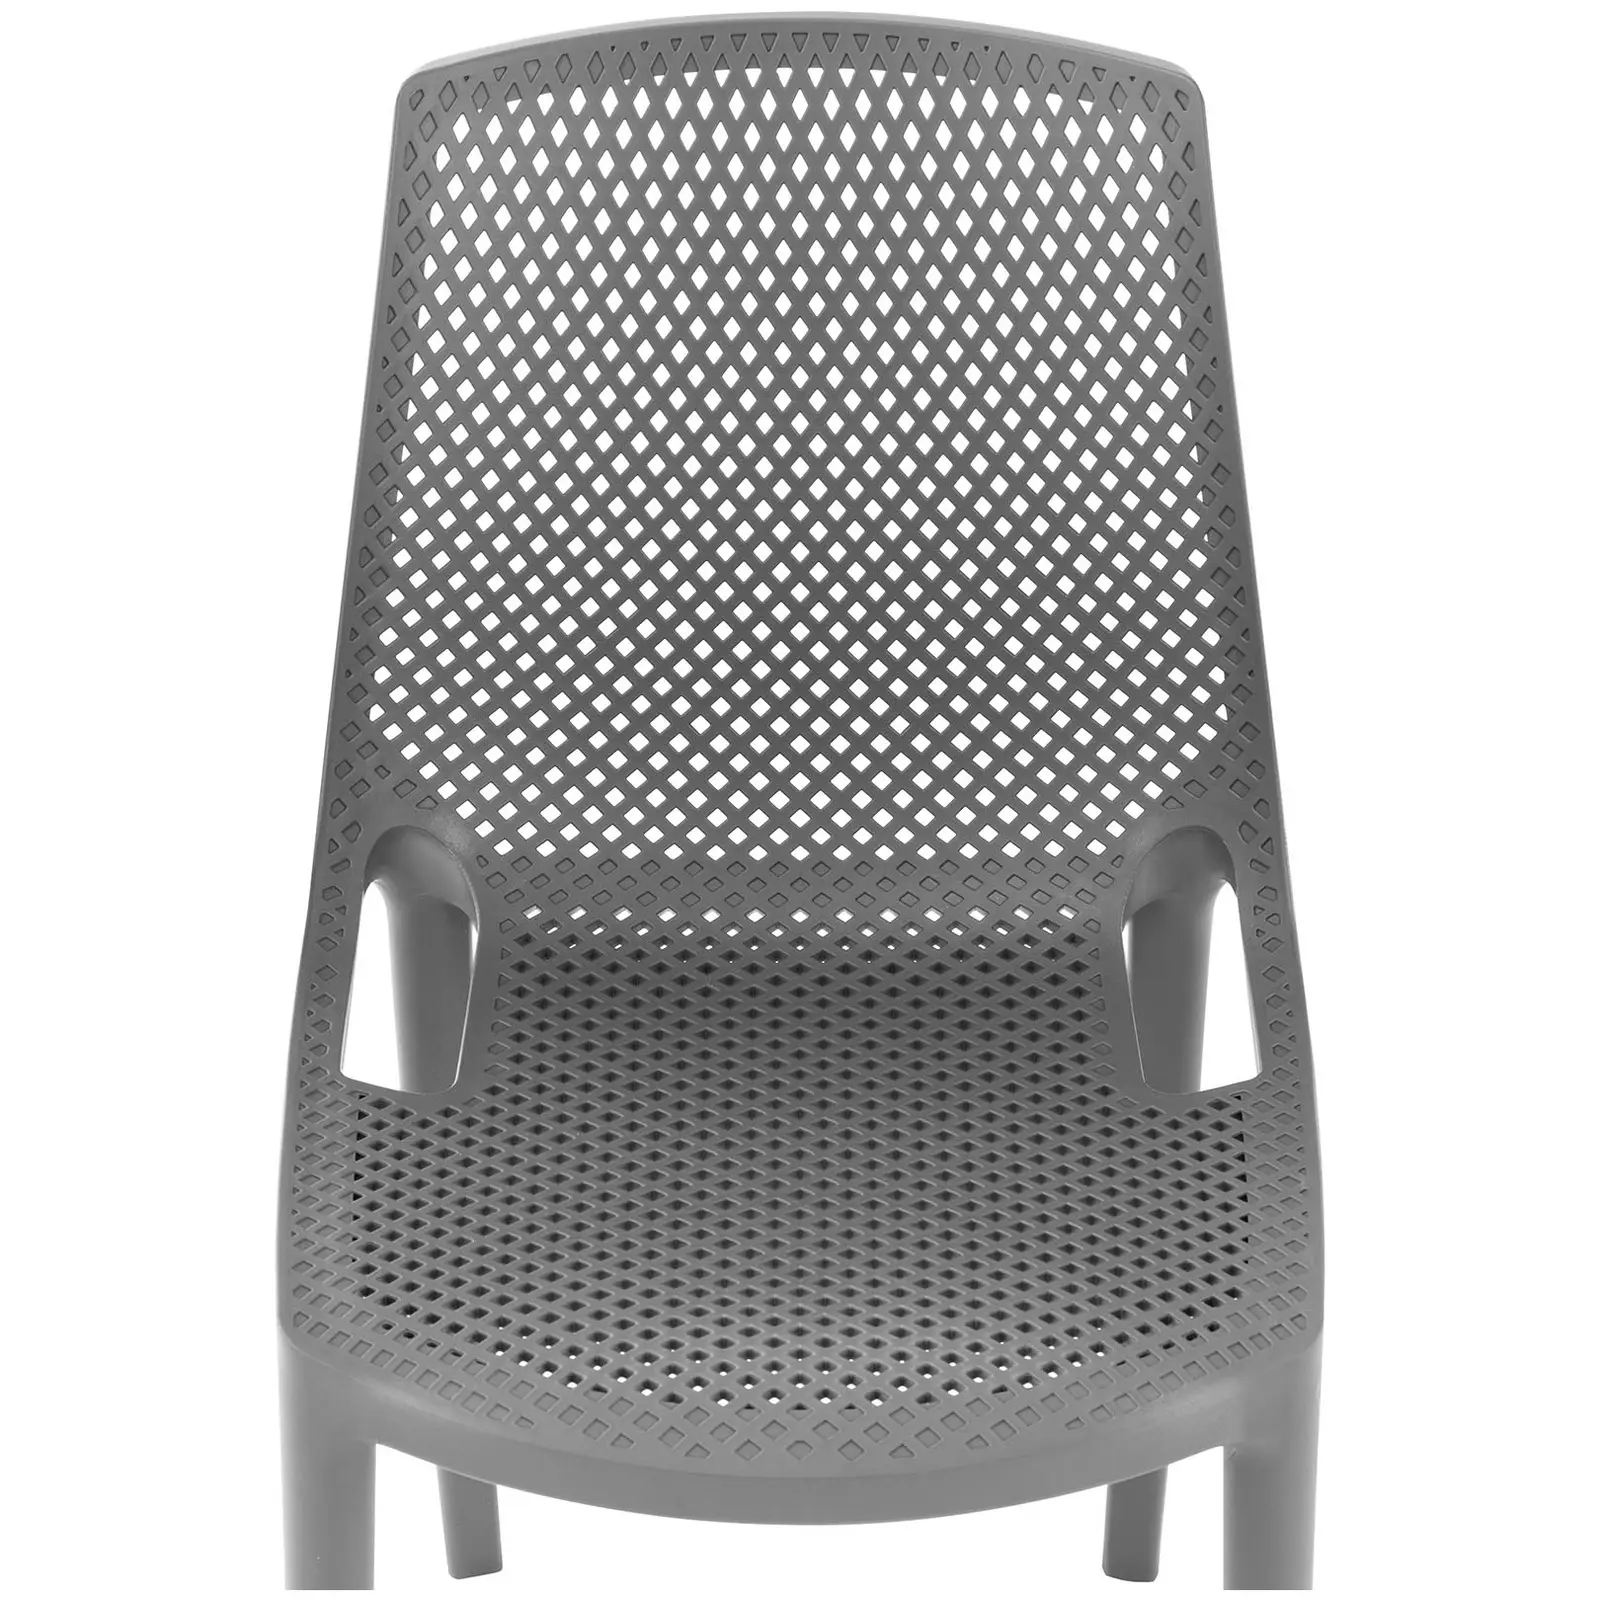 chair - set of 4 - Royal Catering - up to 150 kg - woven backrest - gray